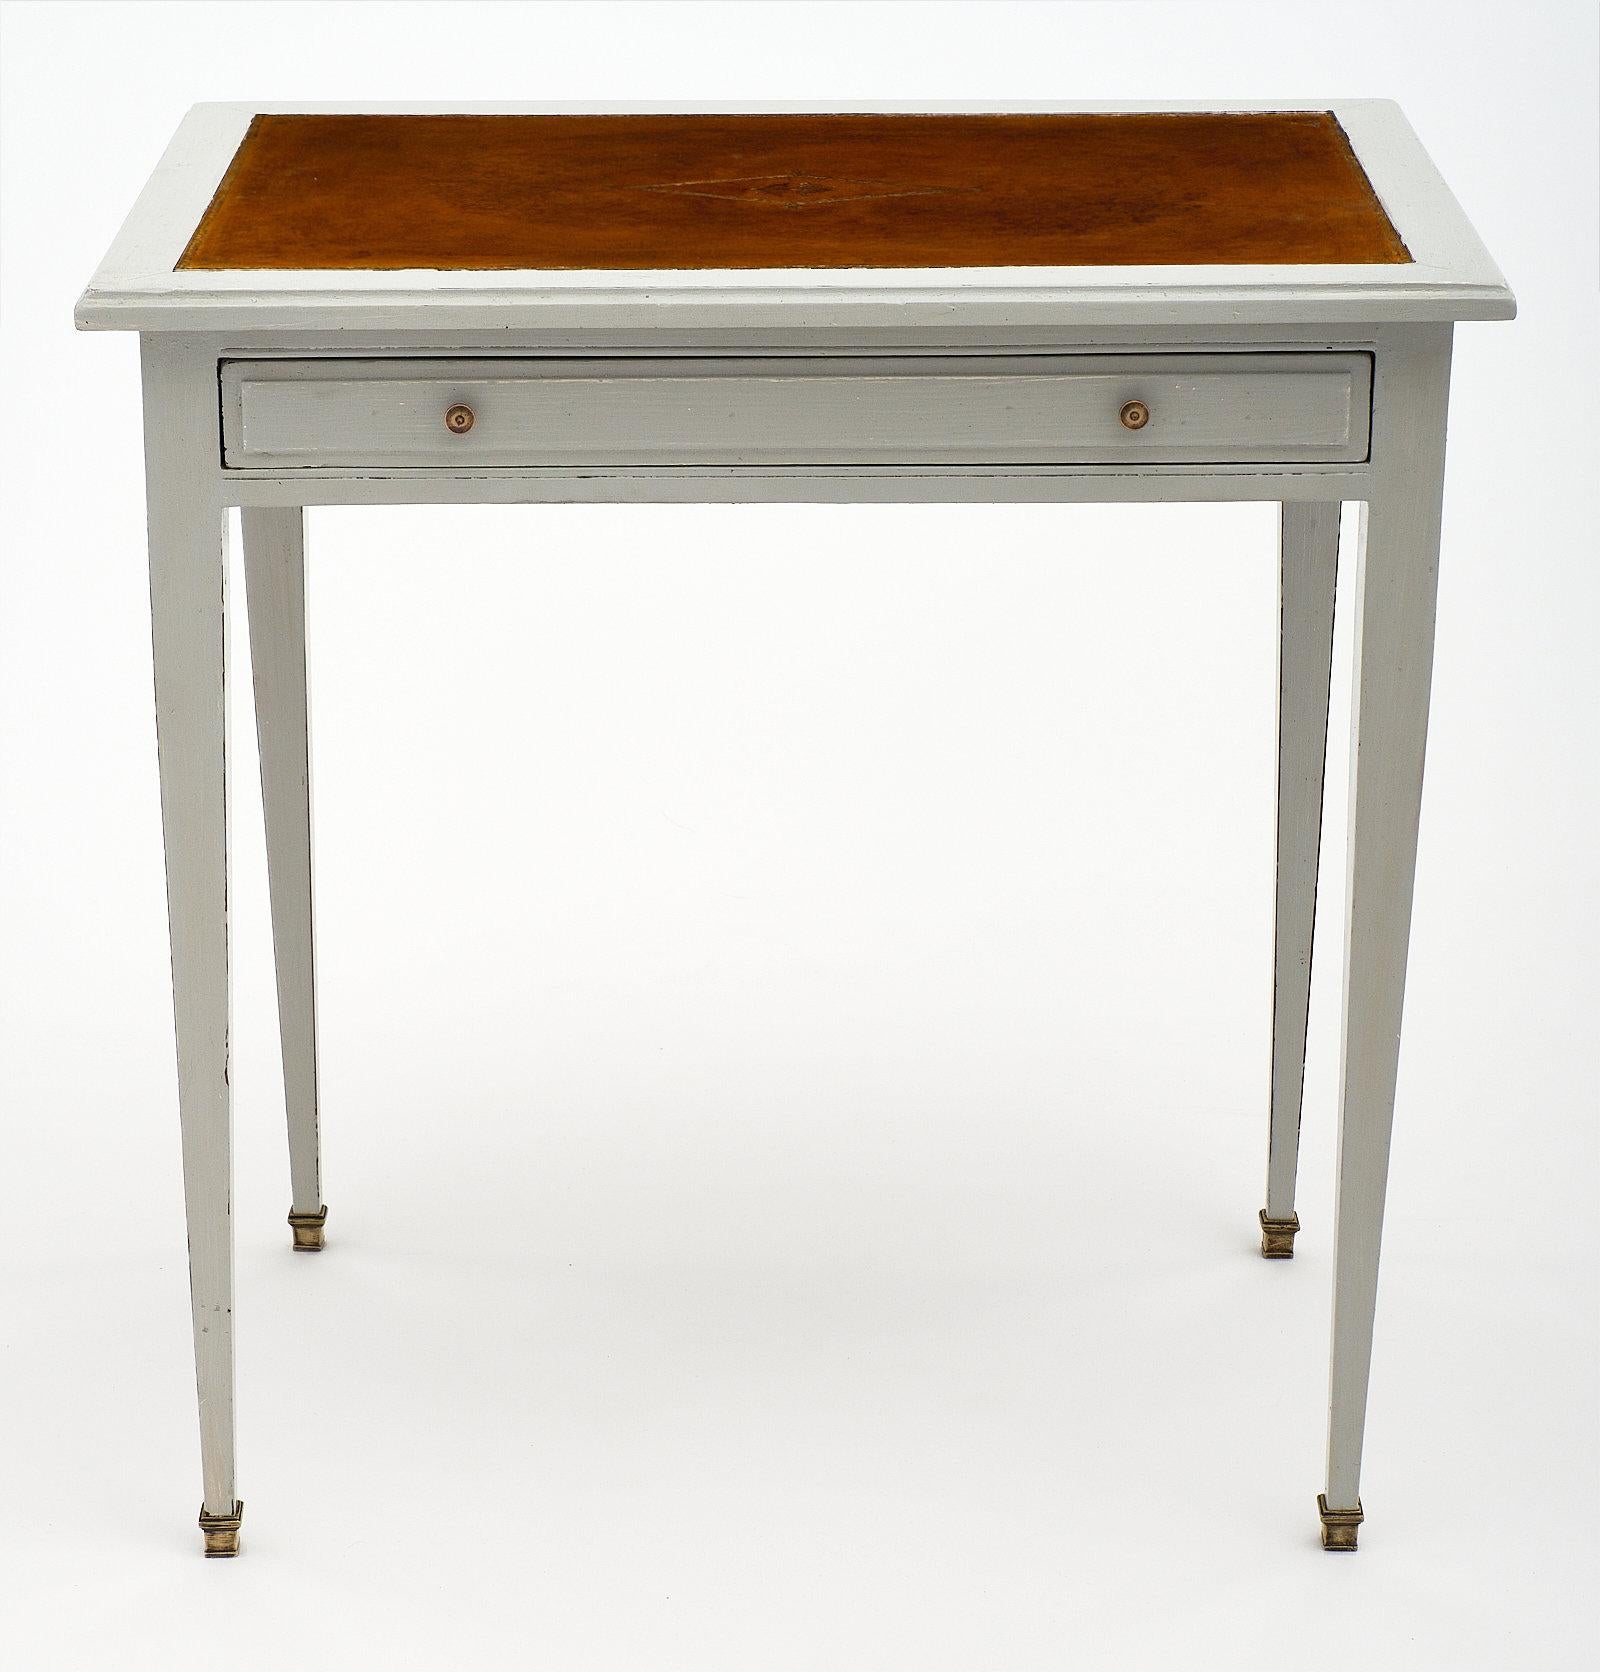 Painted French antique writing desk topped with tan gilt embossed leather in the Louis XVI style. This piece is made of cheerywood and painted Trianon dove-gray. It is a practical piece featuring a large dovetailed drawer and two pull-out leaves